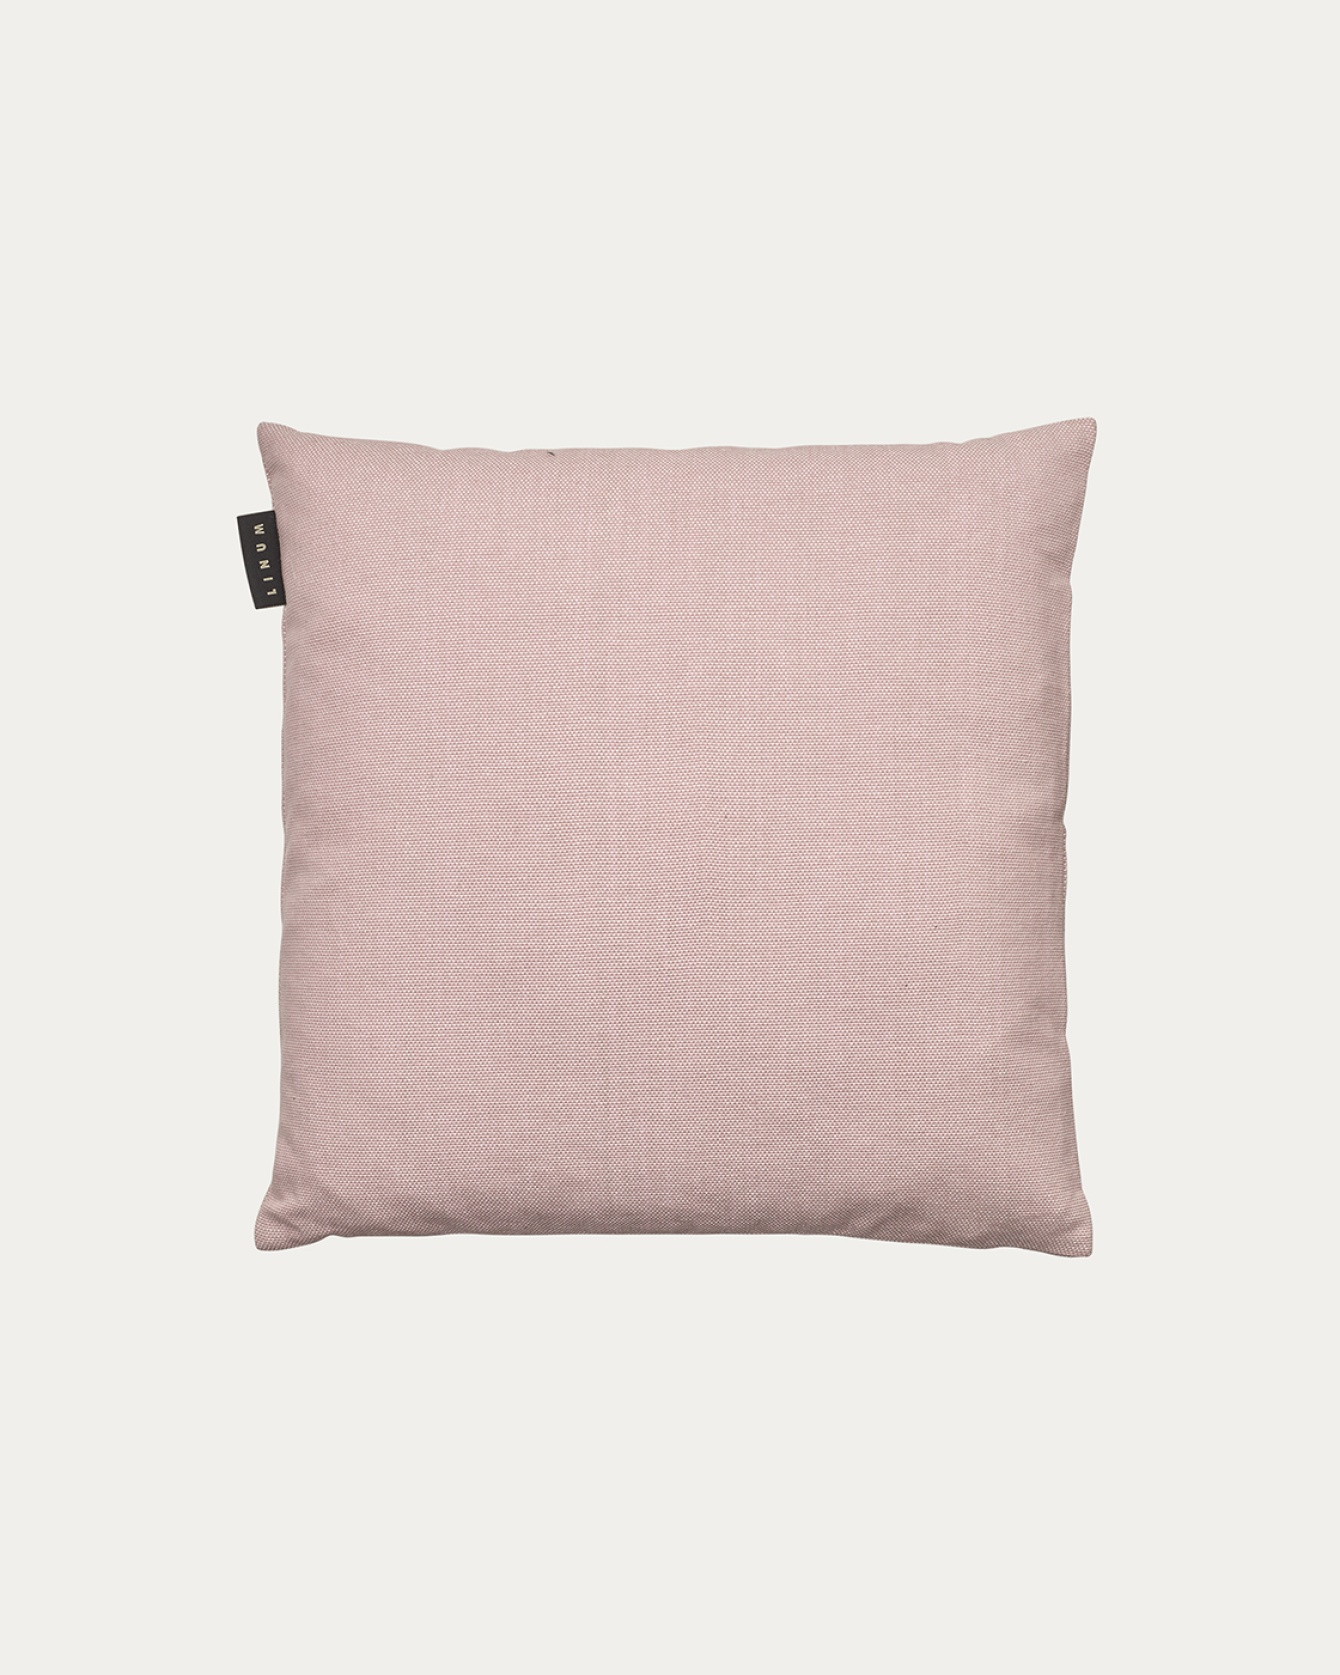 PEPPER Cushion cover 40x40 cm Dusty pink